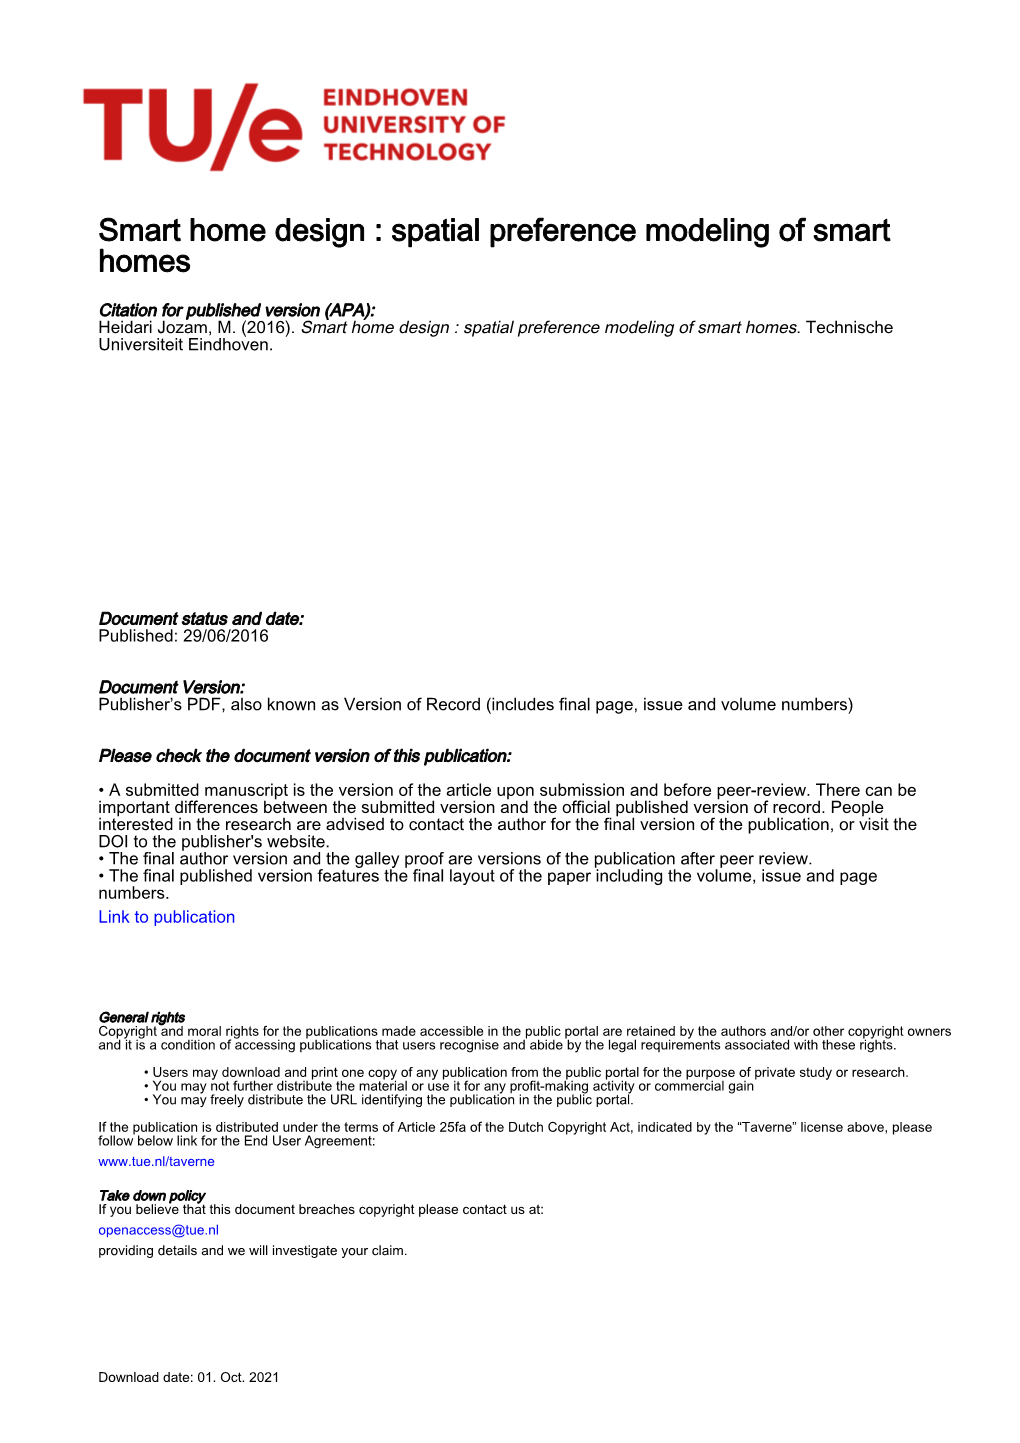 Spatial Preference Modeling of Smart Homes